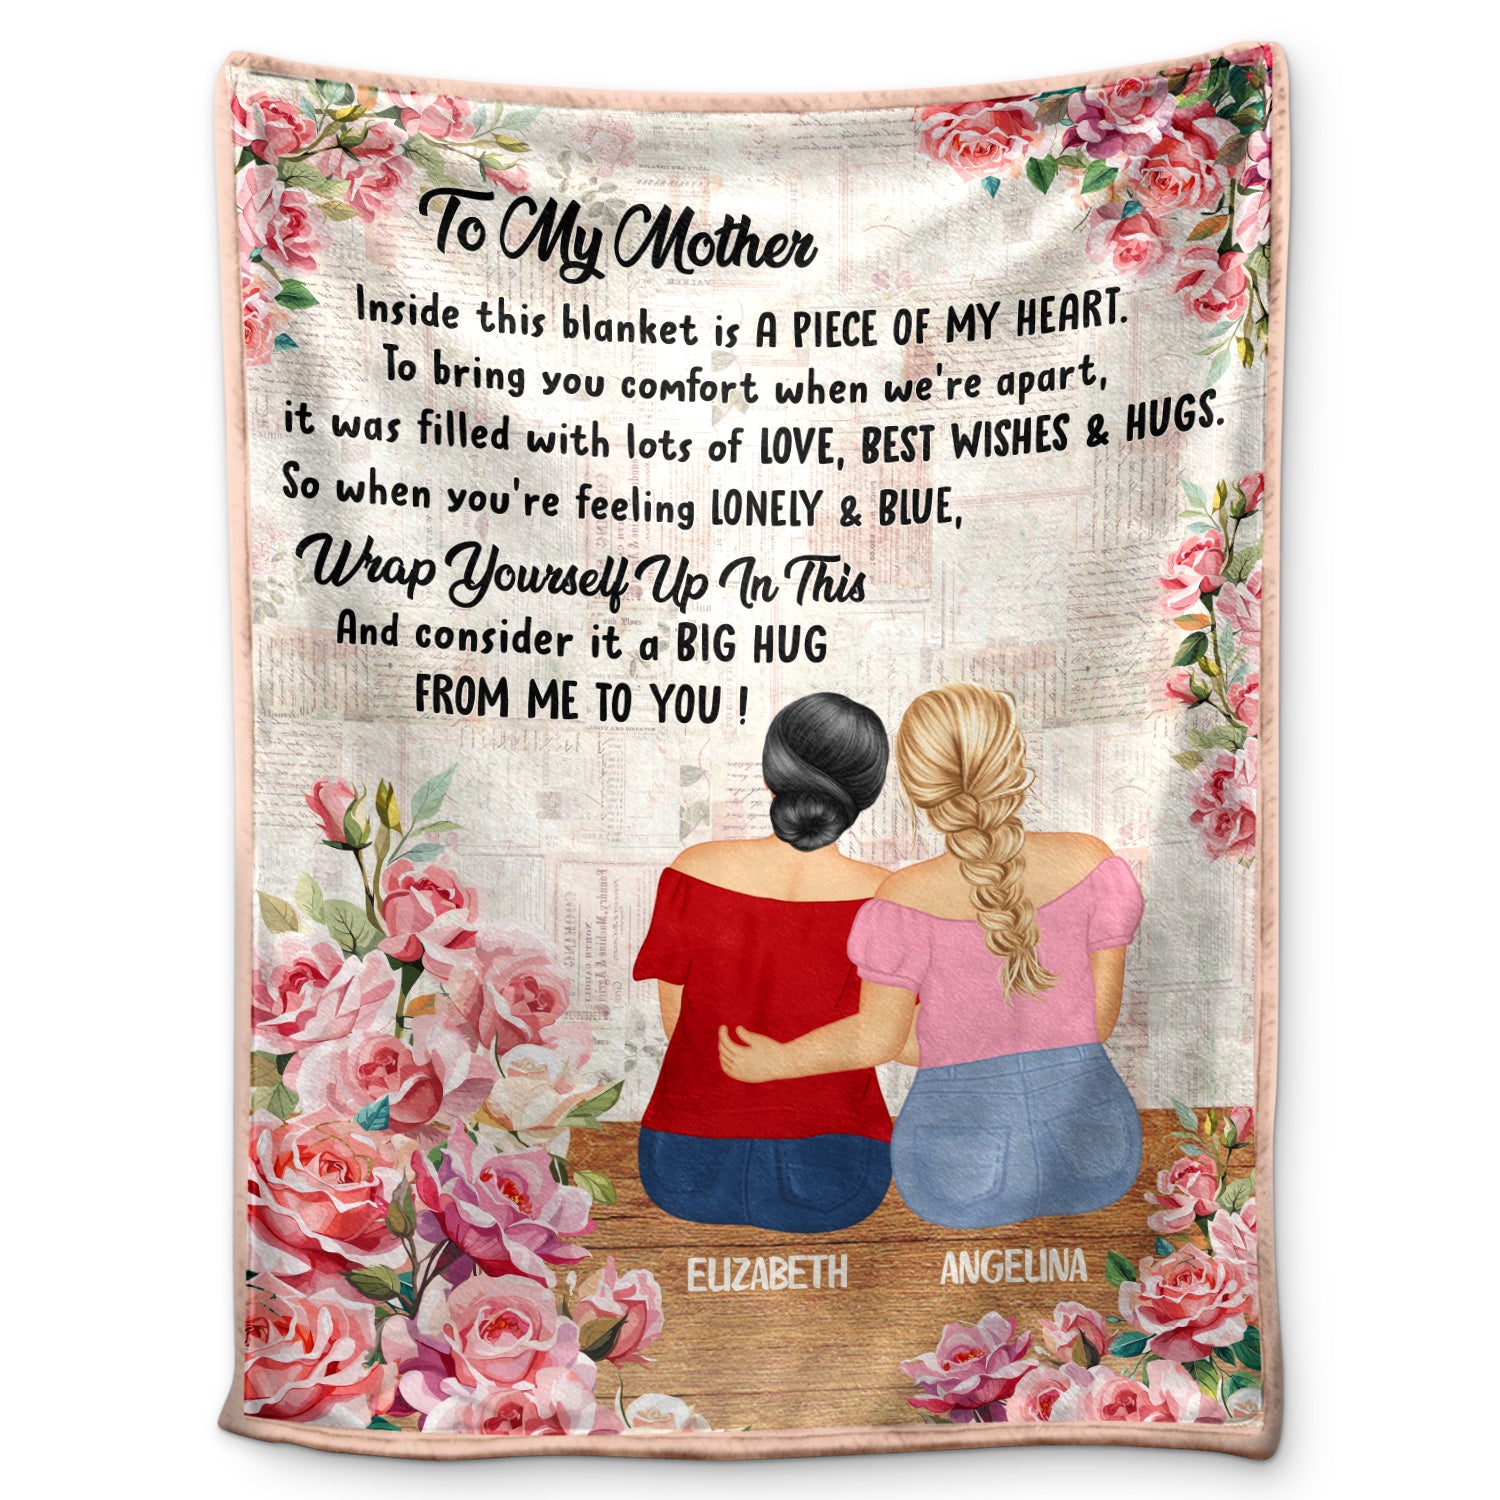 A Piece Of My Heart - Gift For Mother Daughter - Personalized Fleece Blanket, Sherpa Blanket